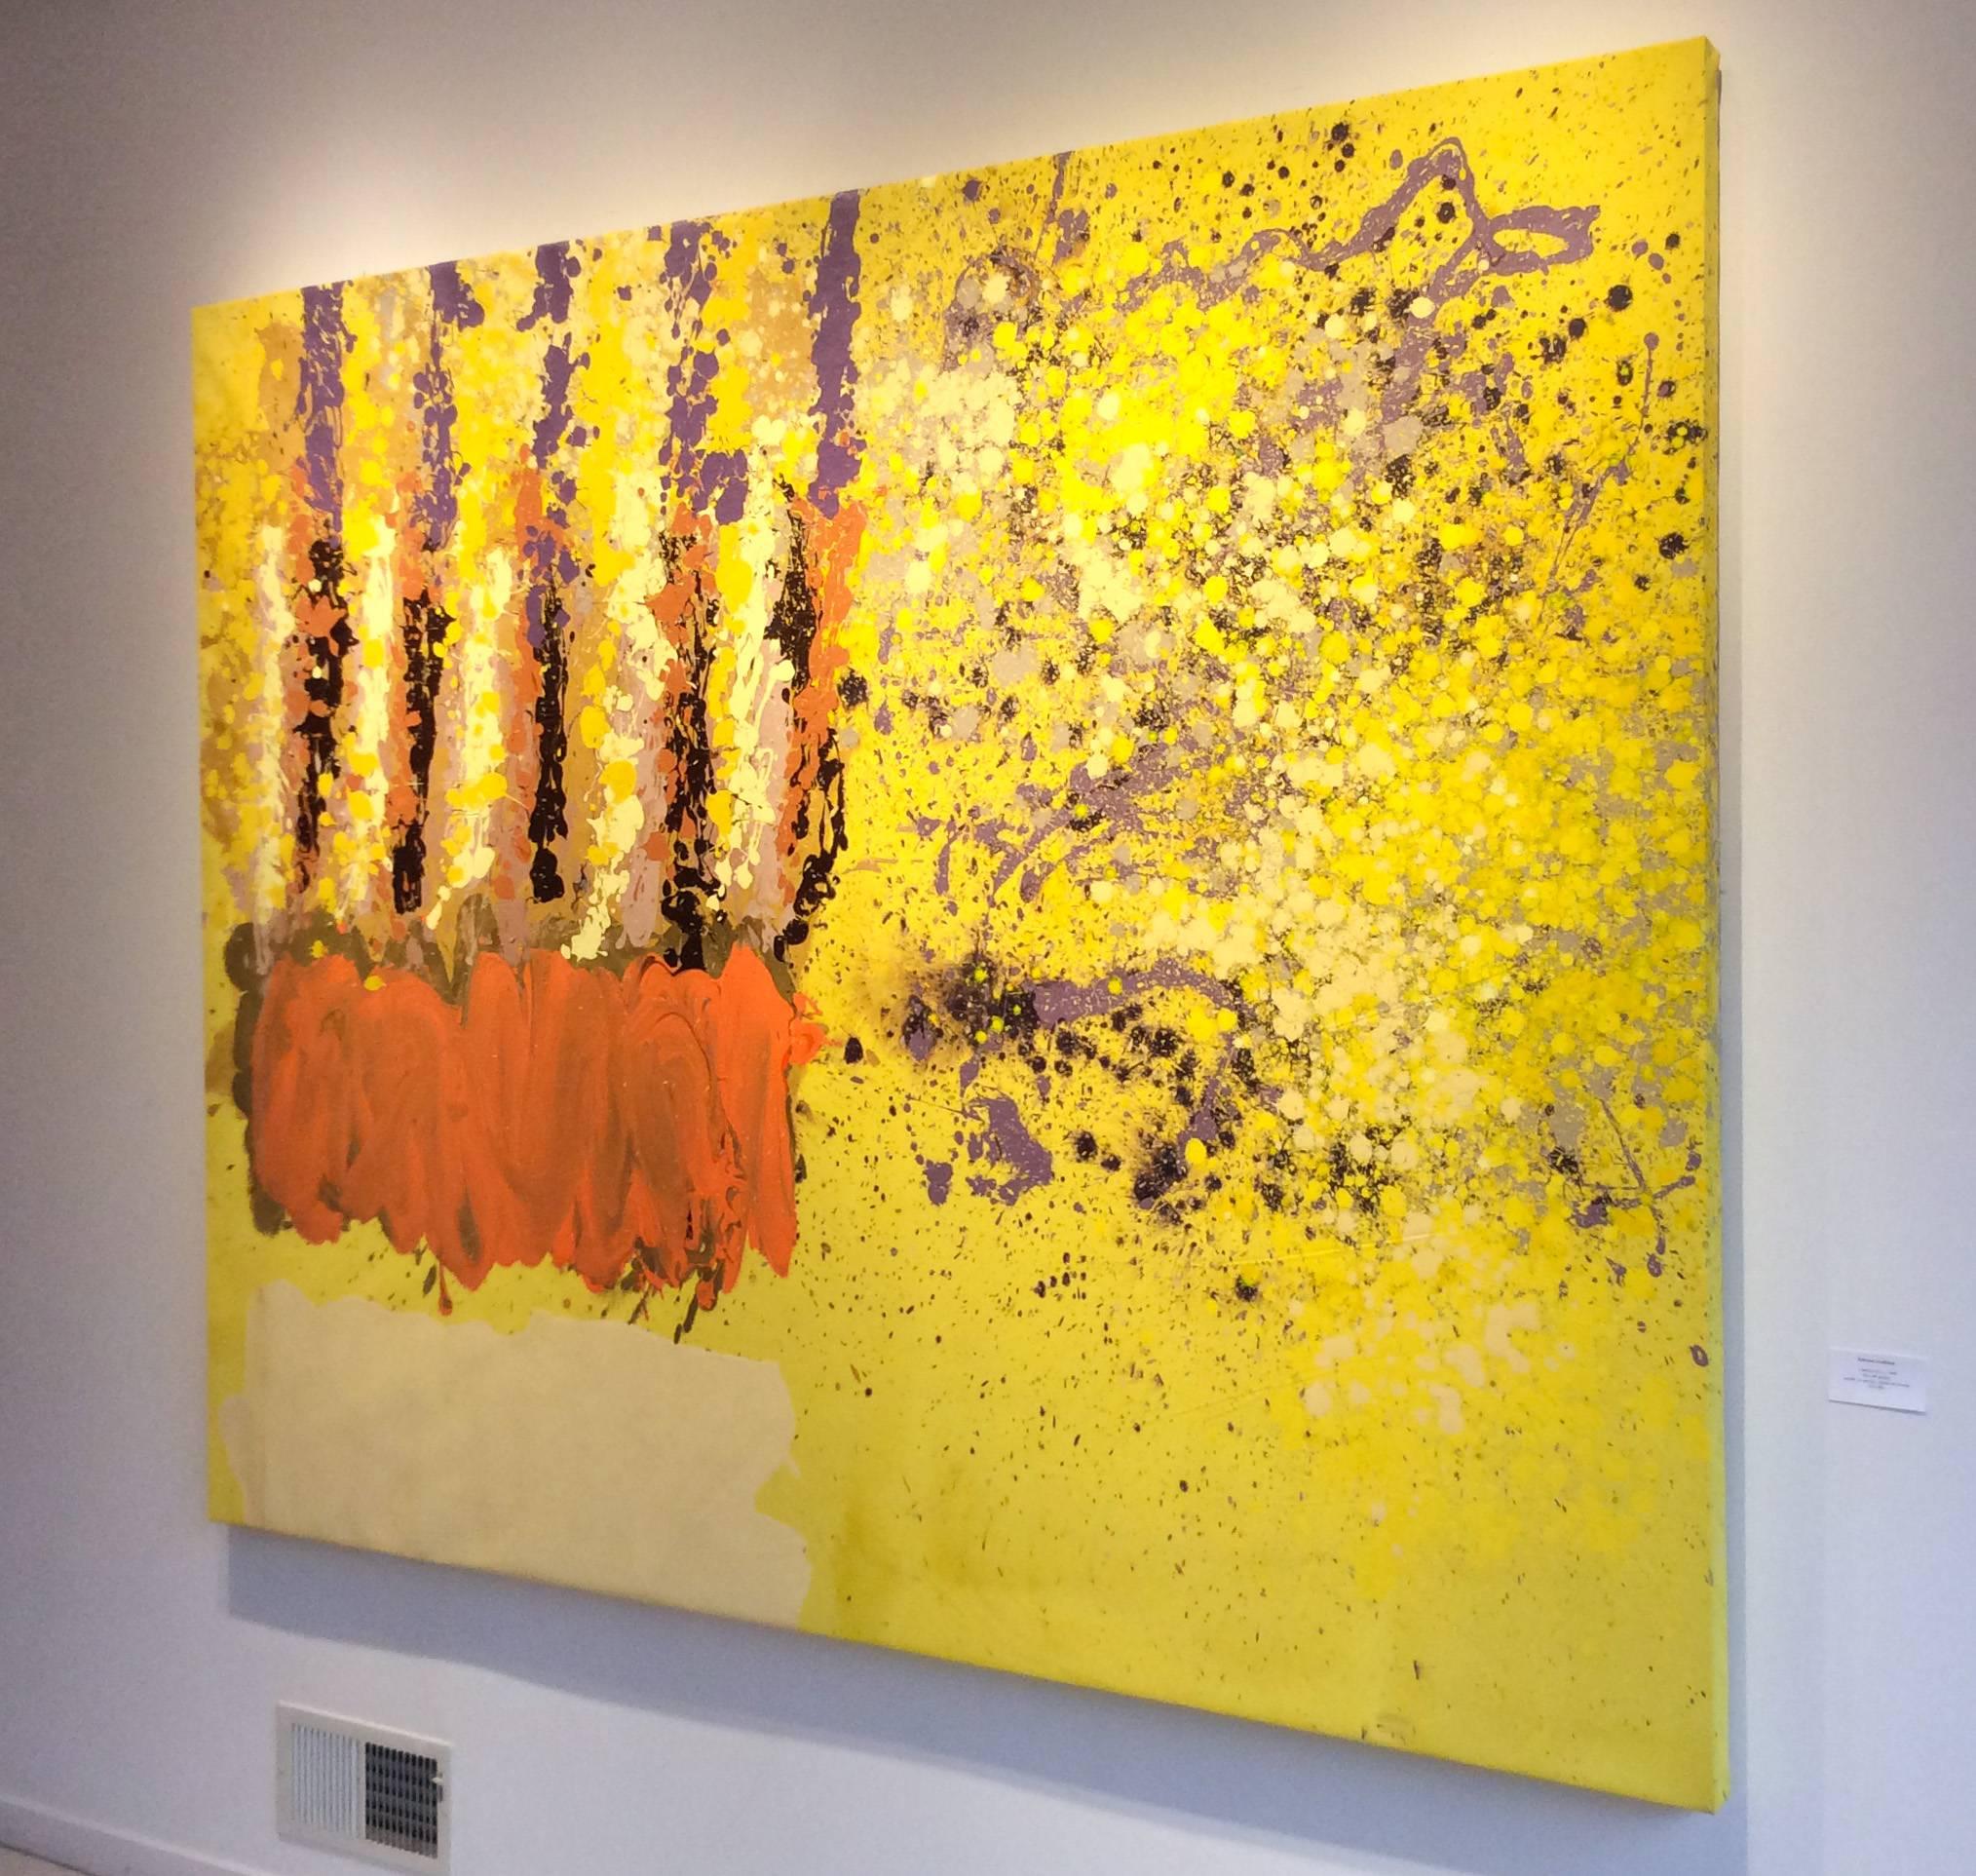 Untitled 033 (1970s Abstract Expressionist Canvas in Canary Yellow & Orange) (Abstrakter Expressionismus), Painting, von Edward Avedisian